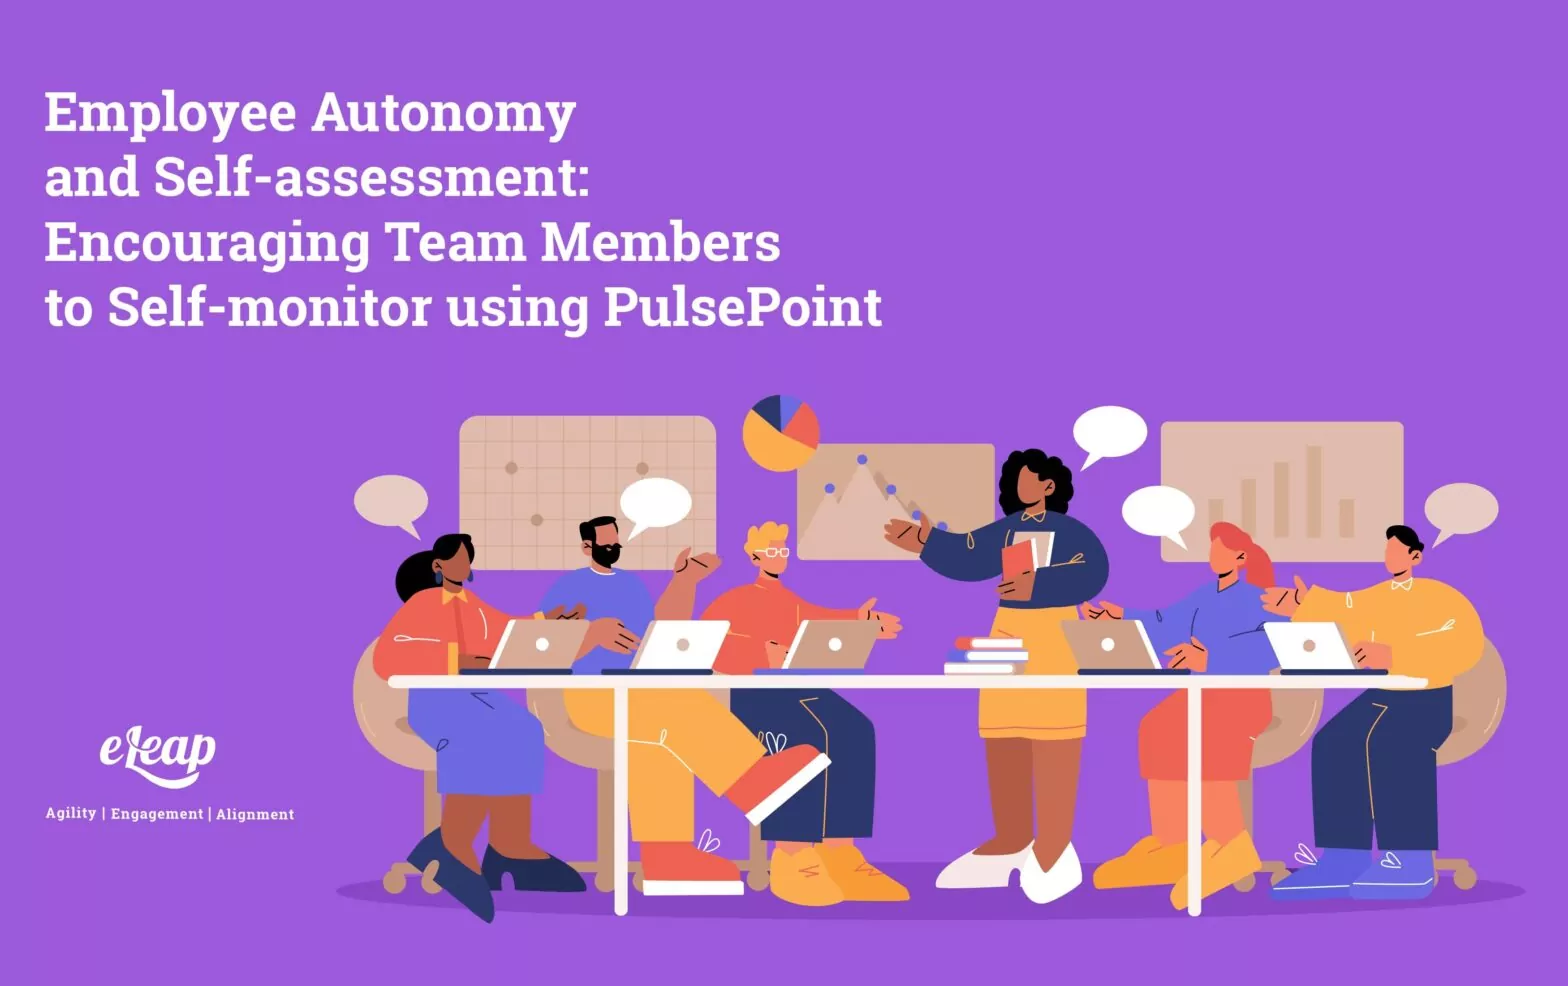 Employee Autonomy and Self-assessment: Encouraging Team Members to Self-monitor using PulsePoint